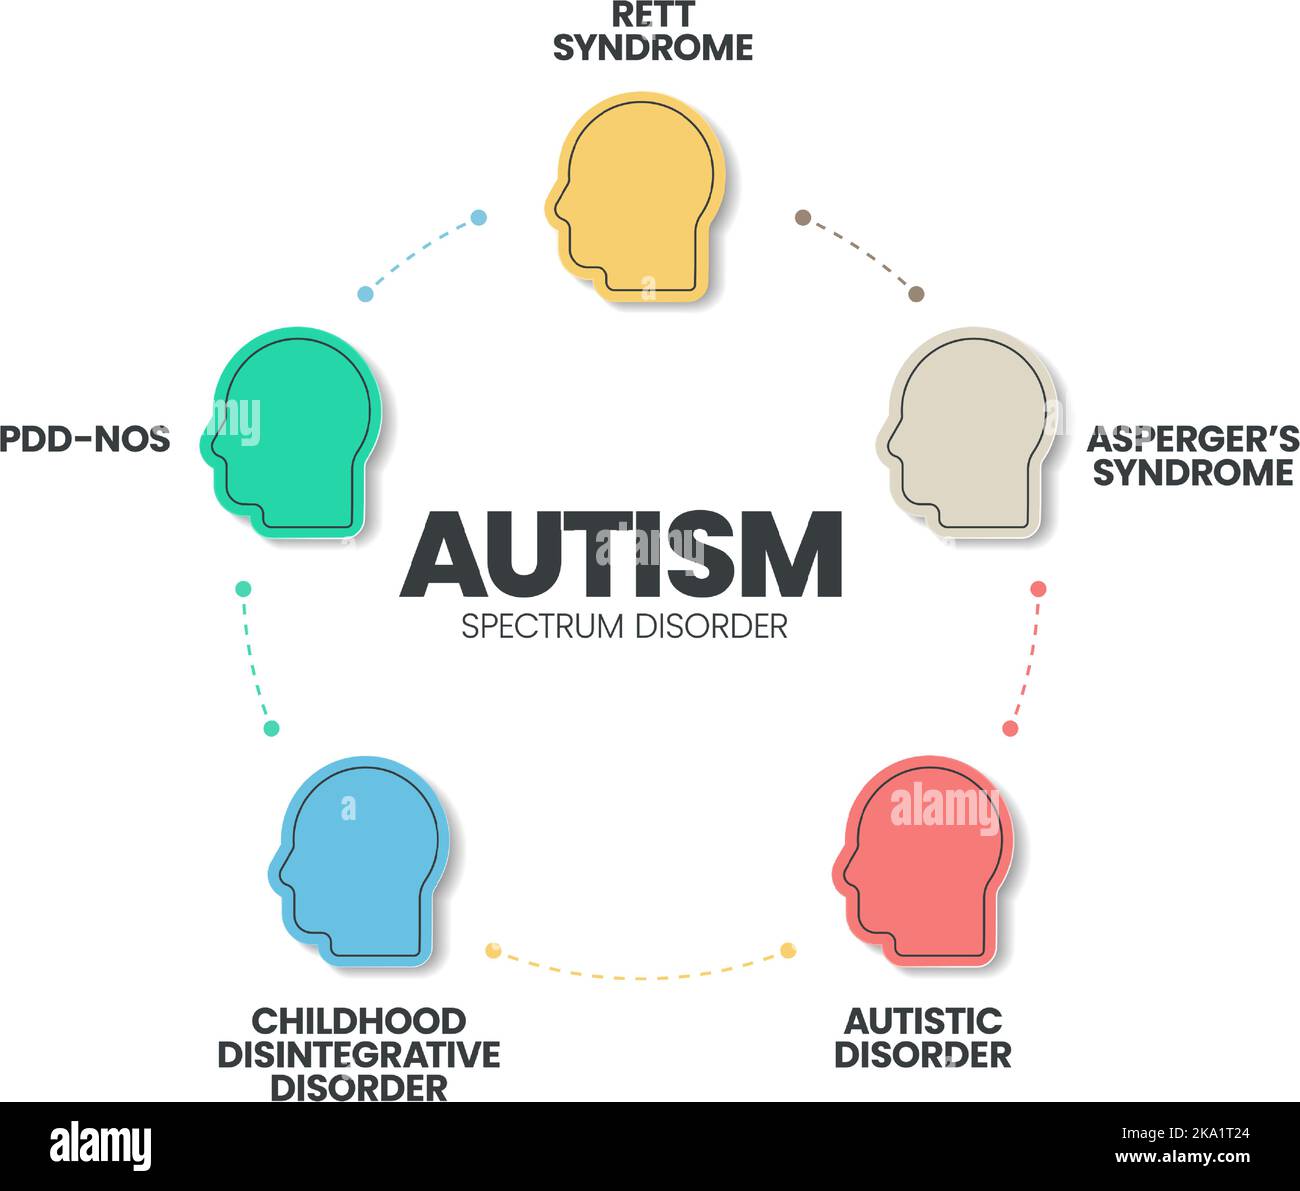 Autism spectrum disorder (ASD) infographic presentation template with icons has 5 steps such as Rett syndrome, Asperger's syndrome, PDD-NOS, Autistic Stock Vector